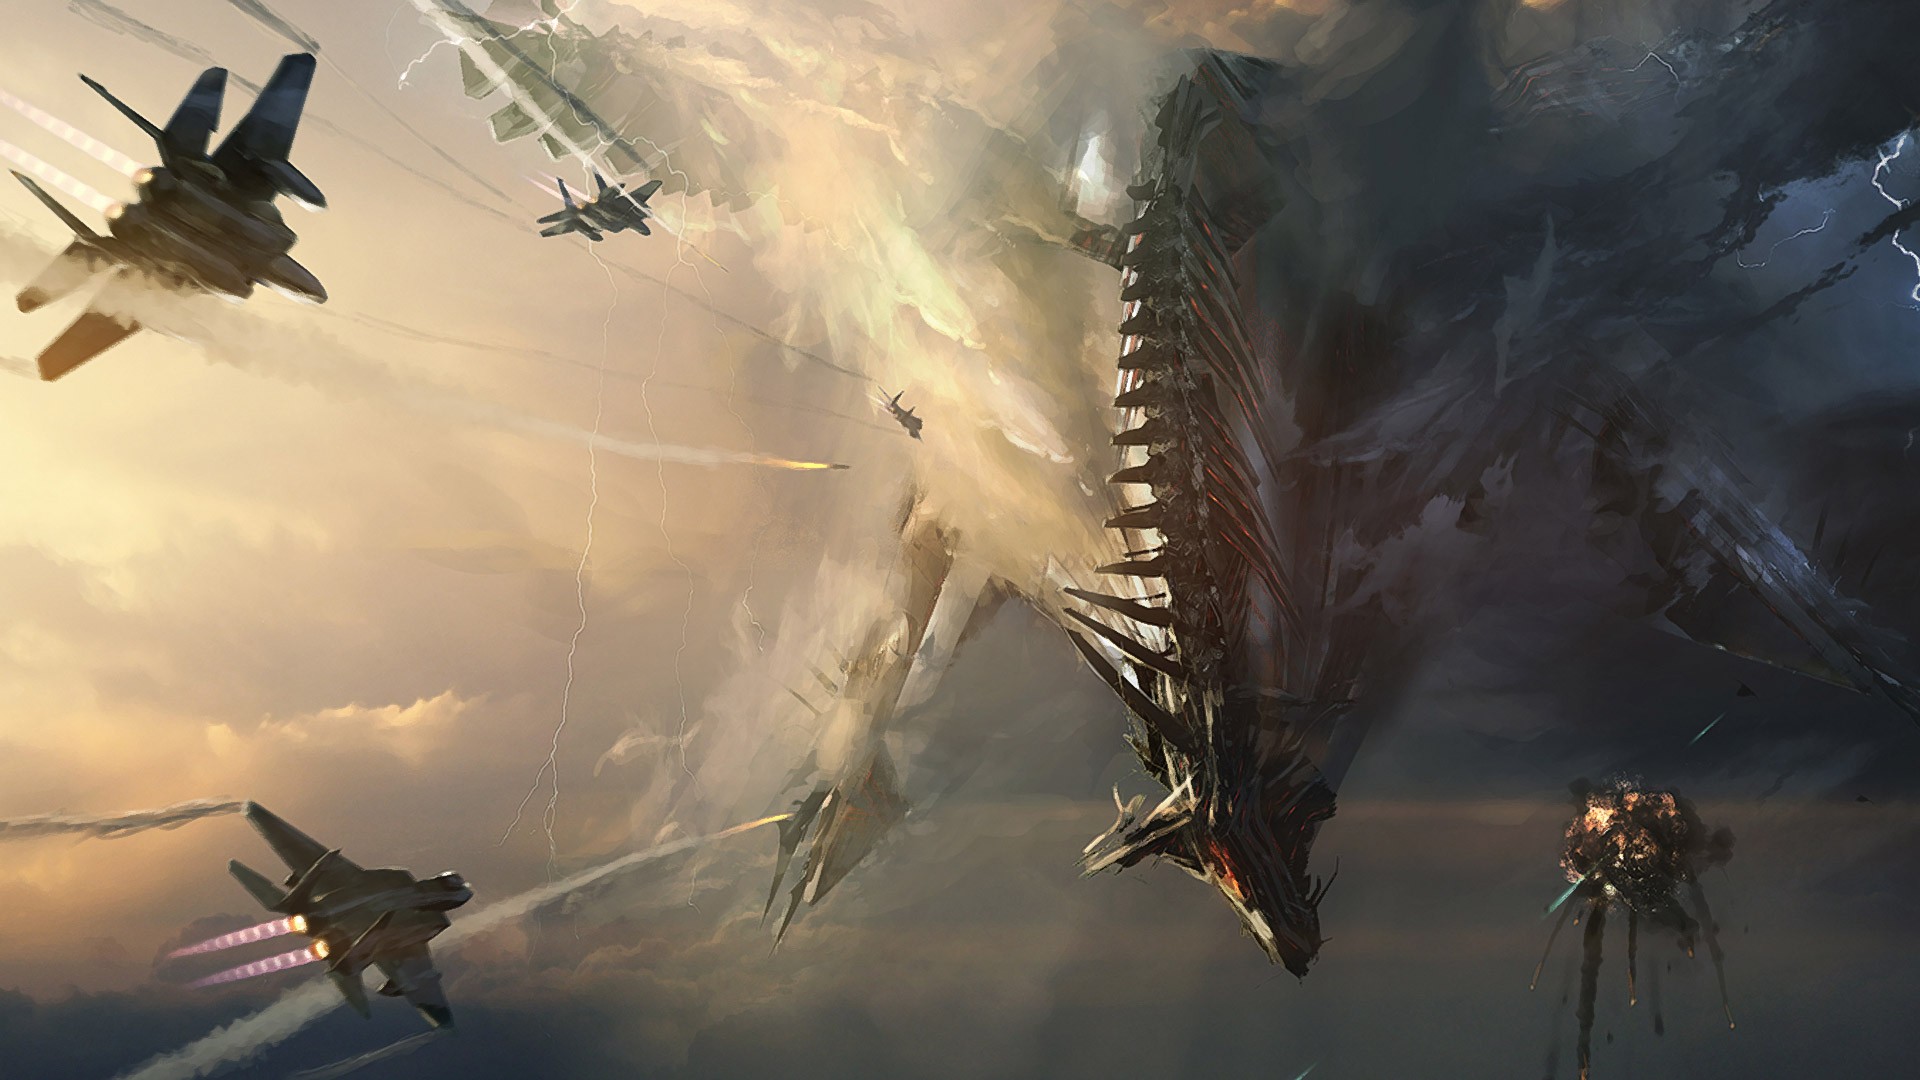 jets, Spaceship, Drawing, Sci, Fi, Science, Battle, Invasion, Sky, War, Military, Fighter, Apocalyptic Wallpaper